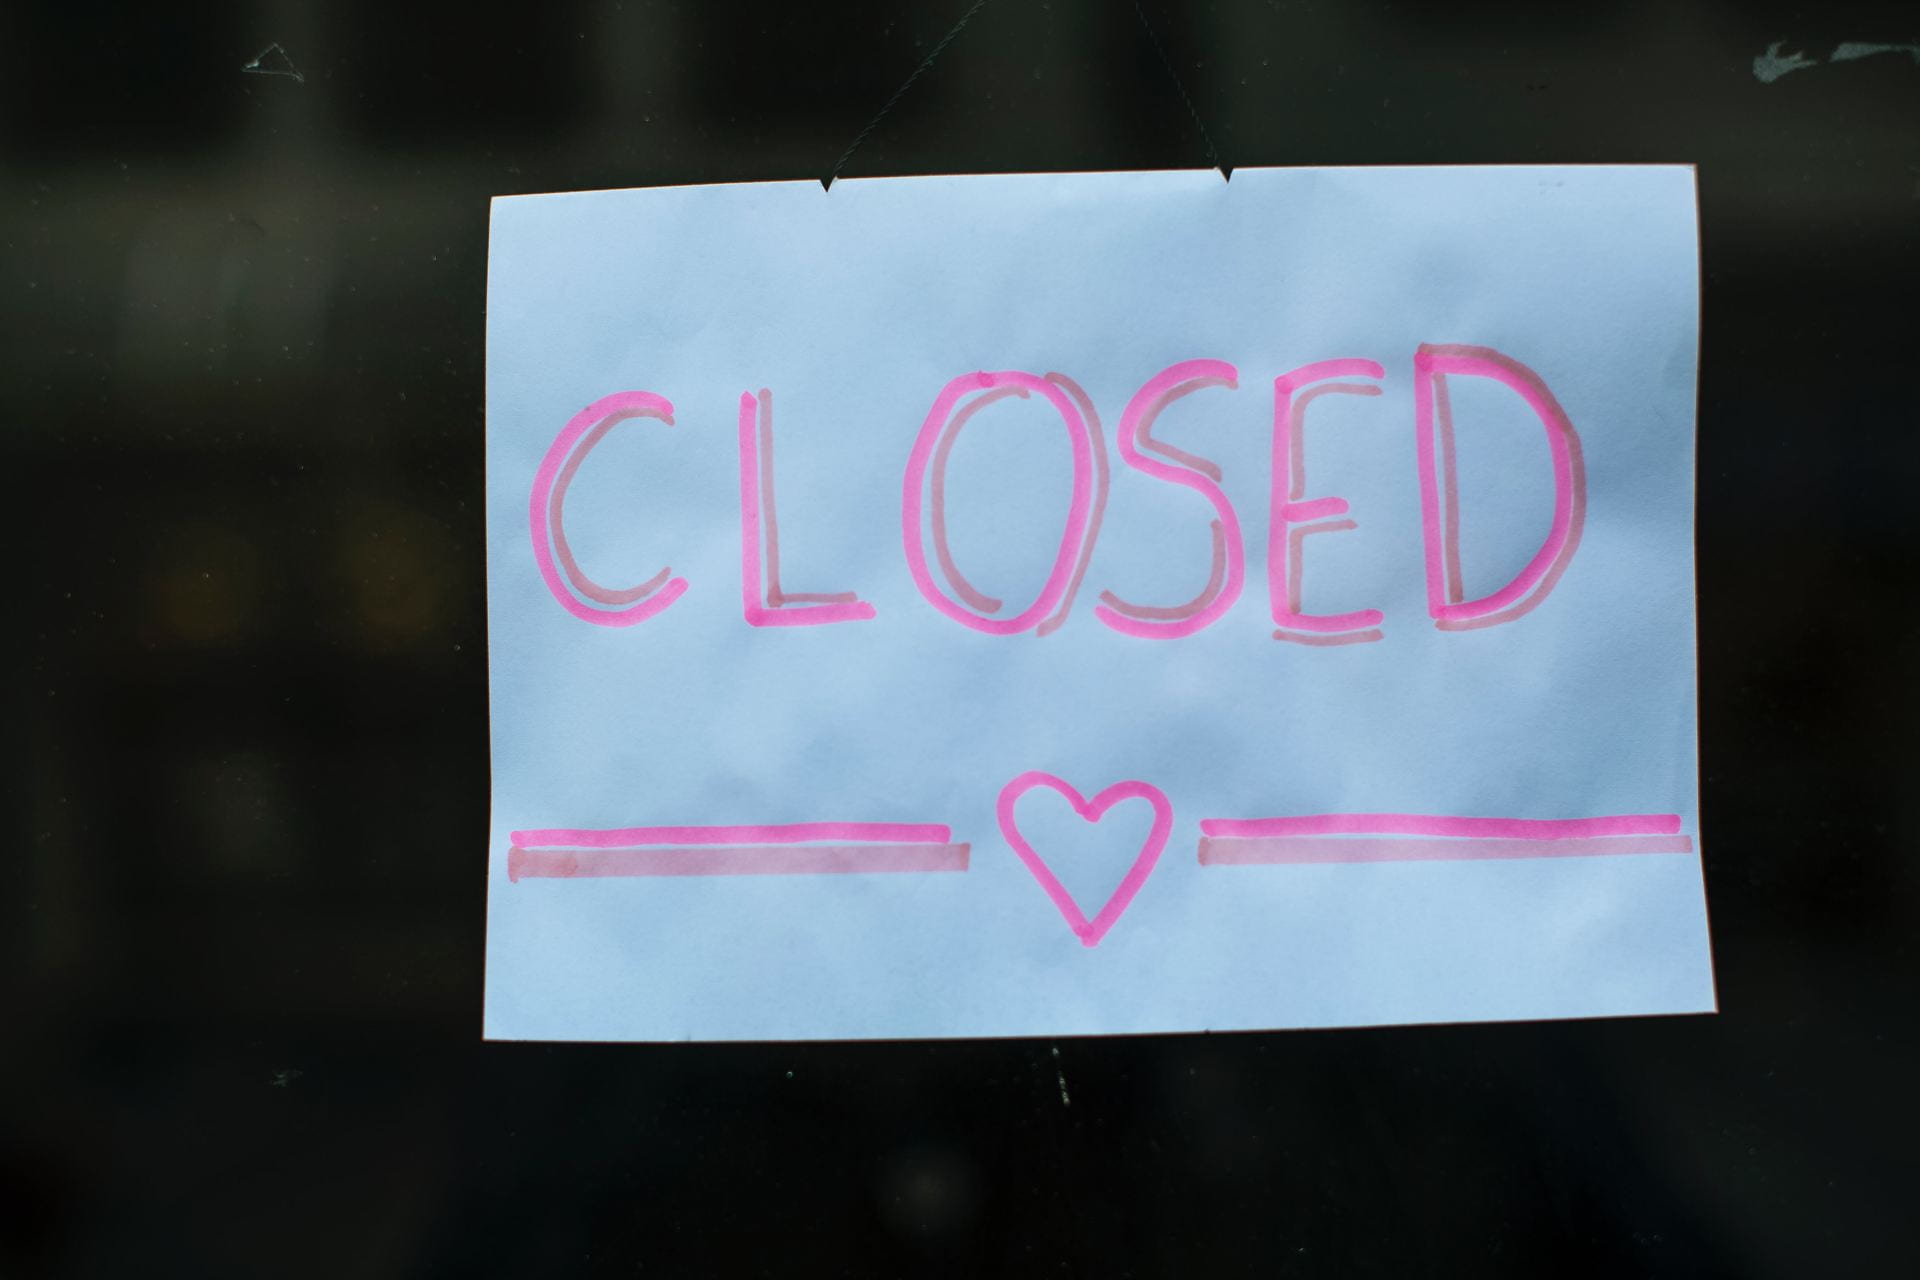 the sign "closed"